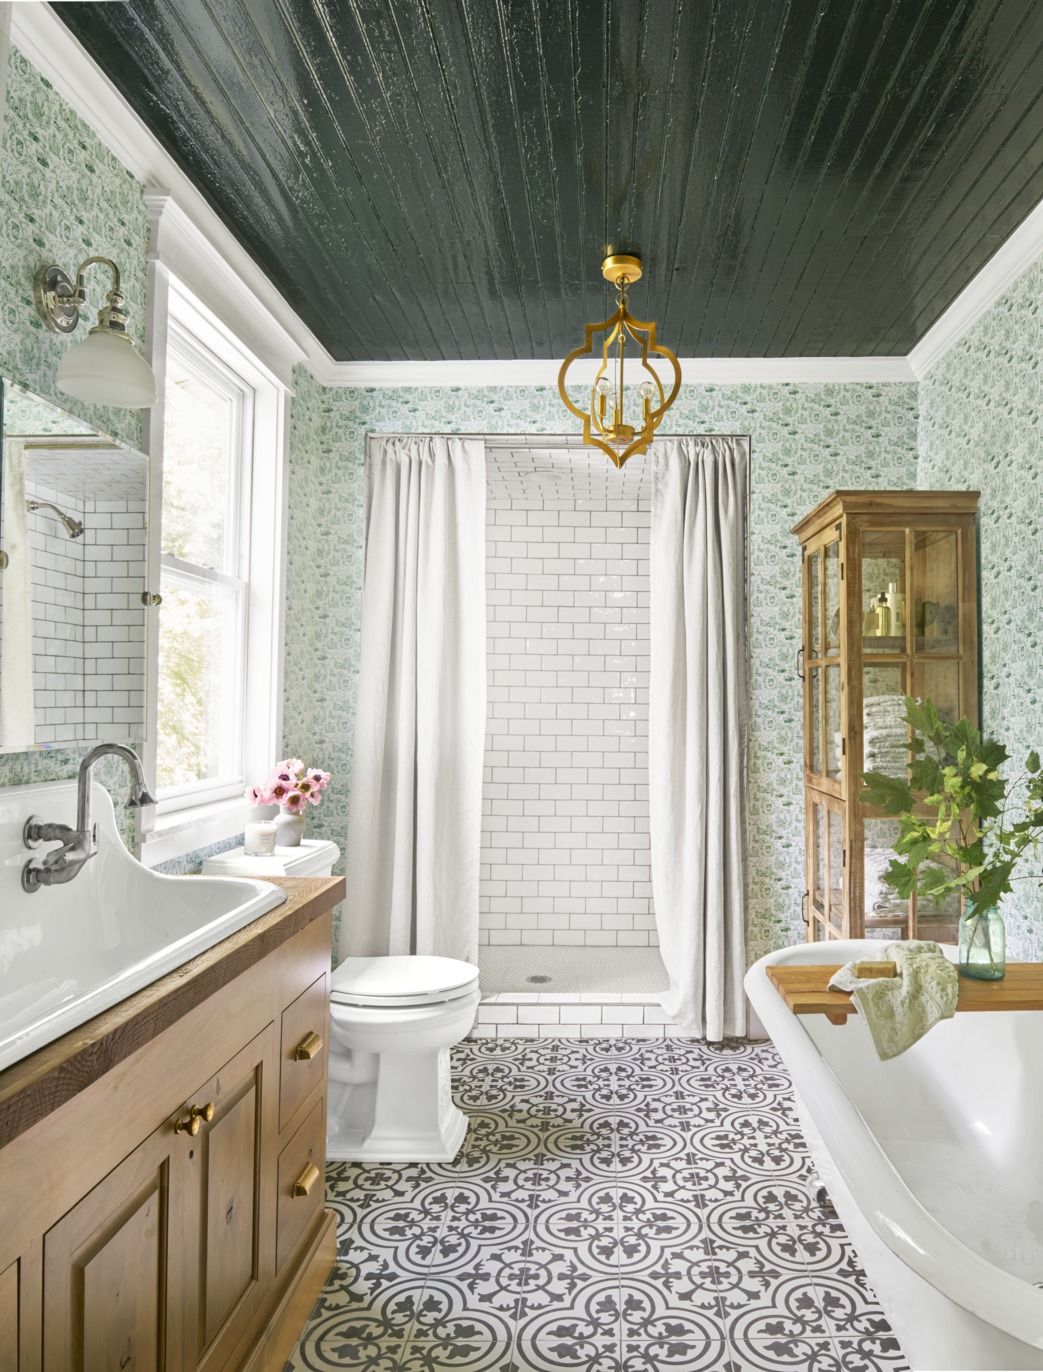 15 Dreamy Light Fixtures for Every Small & Large Bathroom